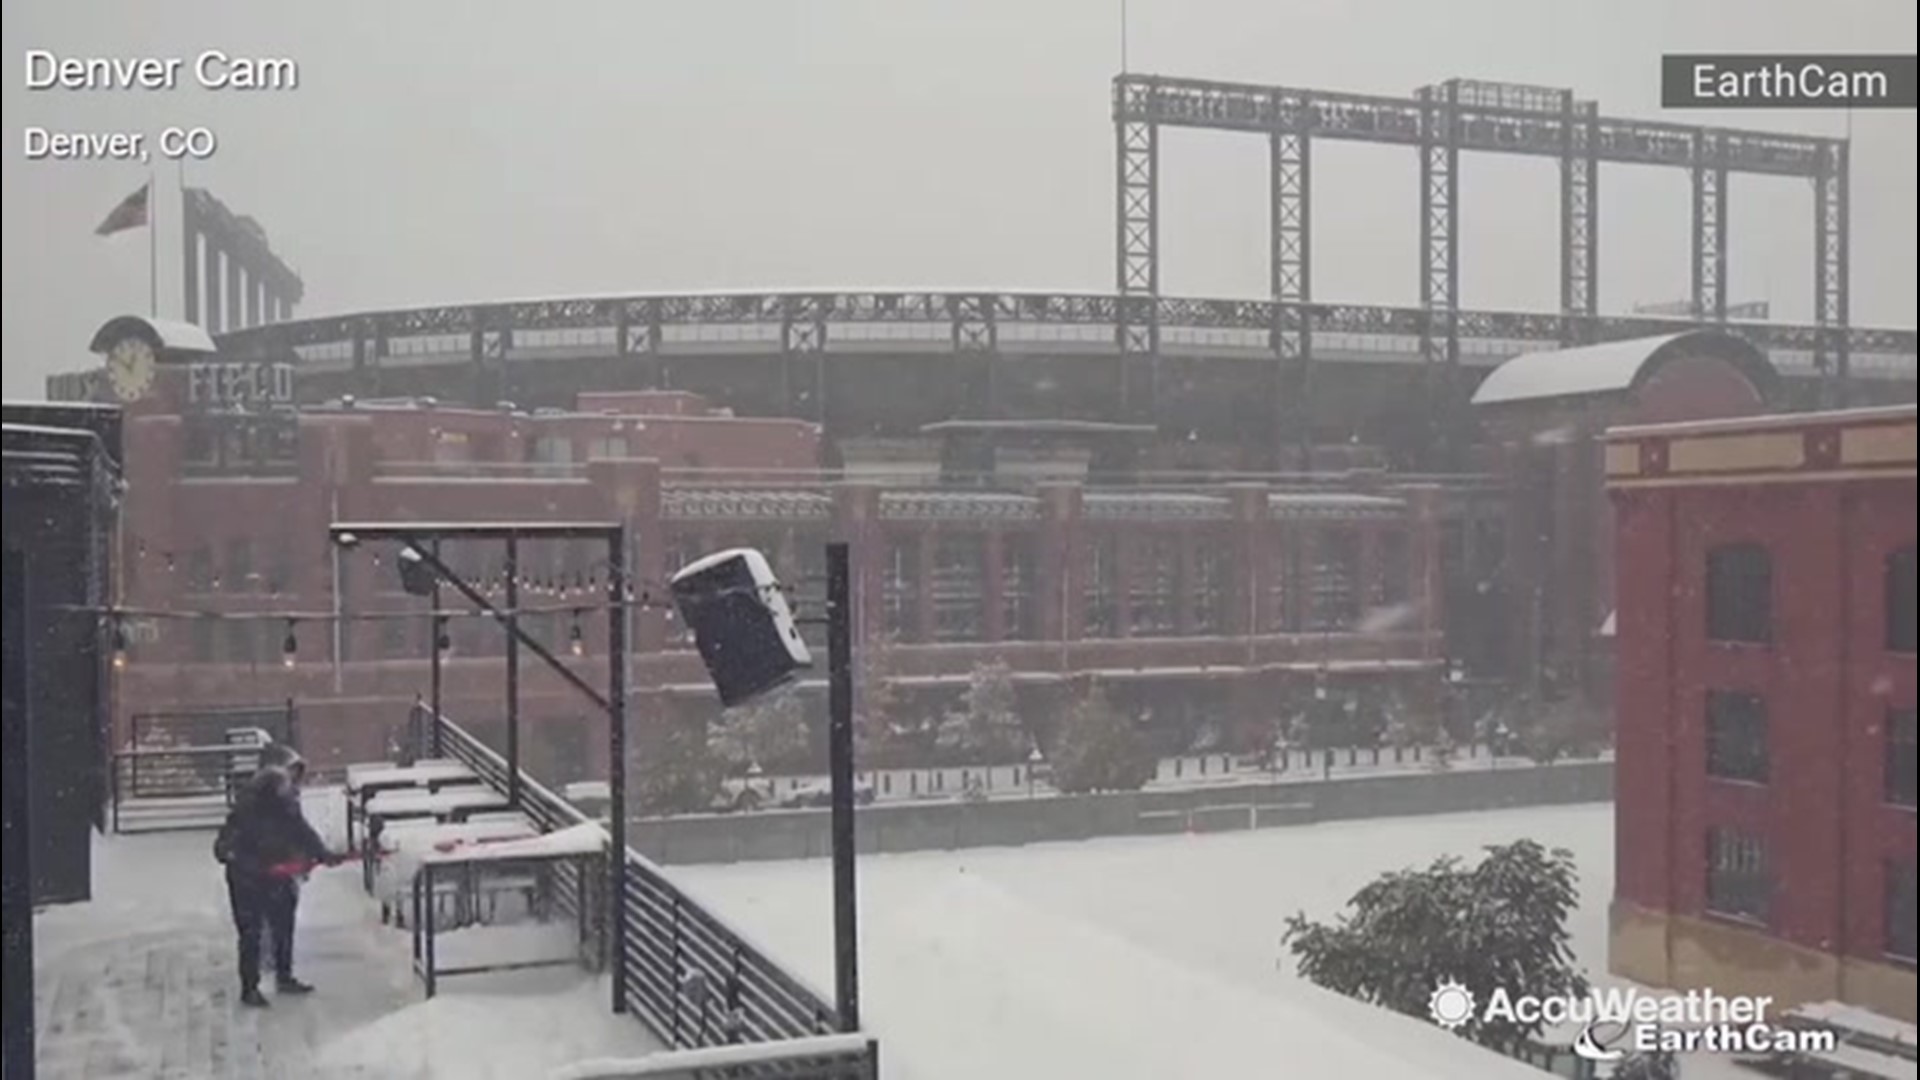 This EarthCam video shows a day-by-day comparison of Denver, Colorado, after snowfall blanketed the city on Oct. 10. The previous day was much warmer and drier.